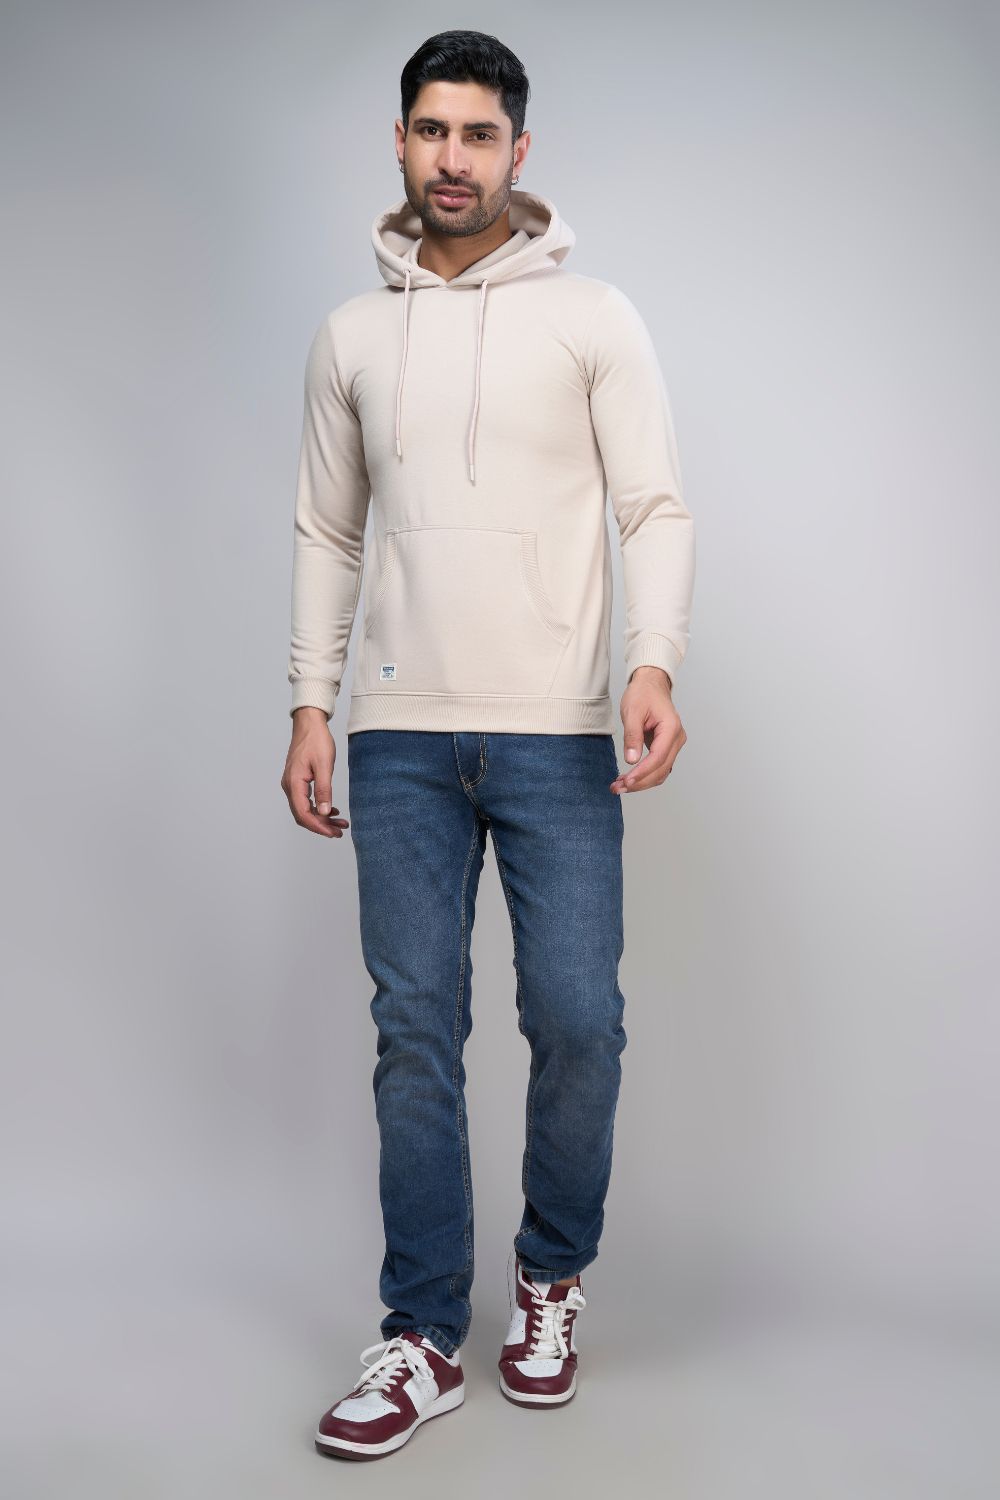 Soft Beige colored, hoodie for men with full sleeves and relaxed fit, full view.